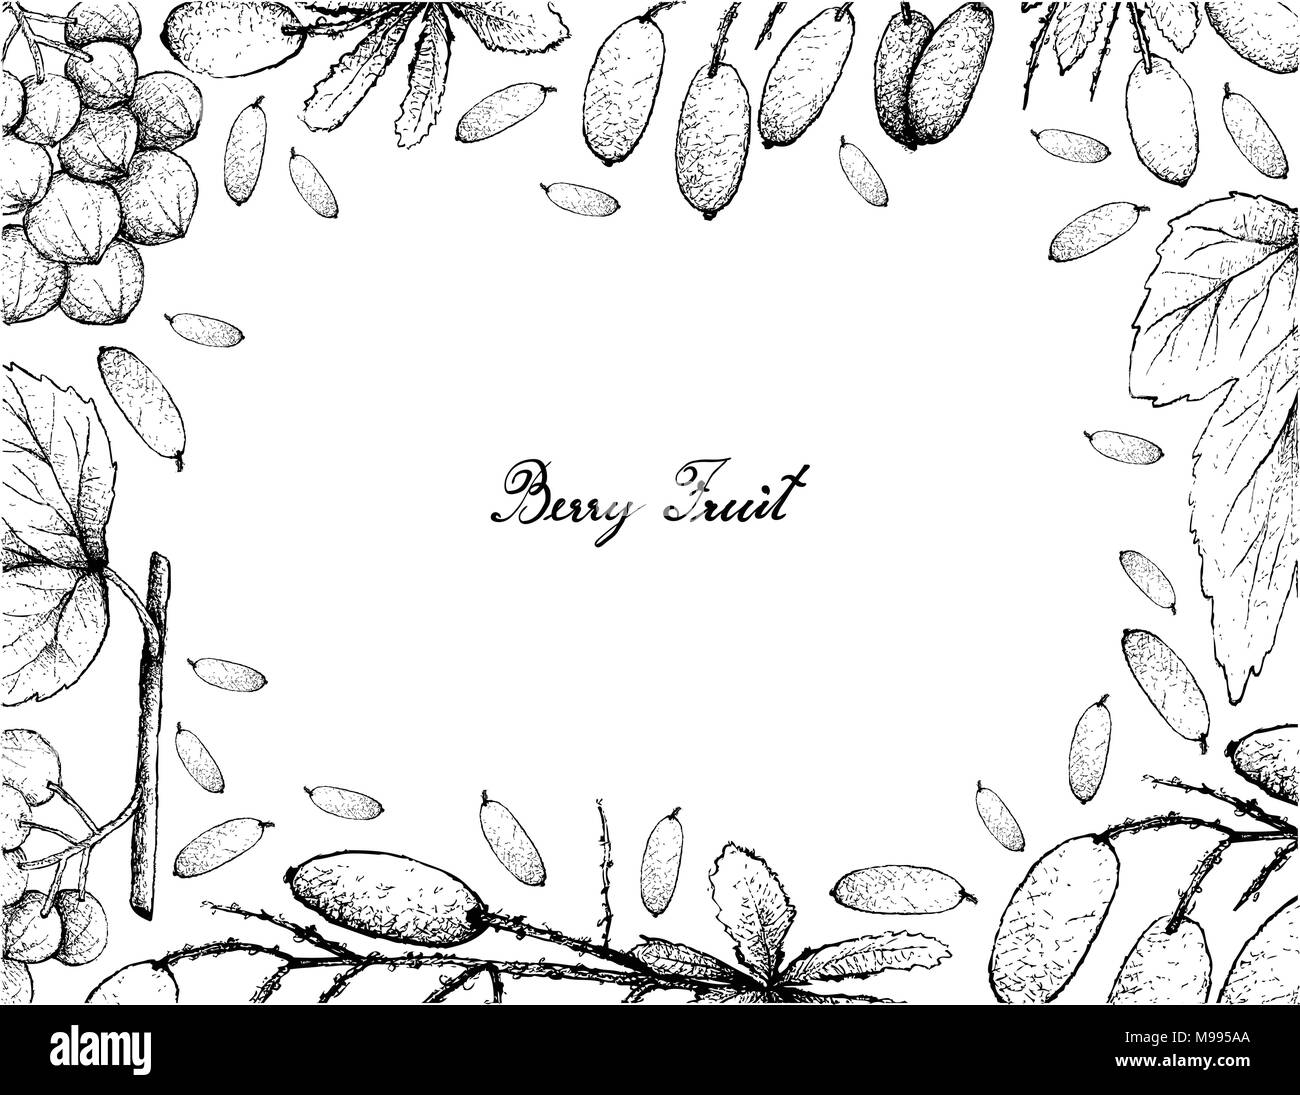 Berry Fruit, Illustration Frame of Hand Drawn Sketch of Ampelocissus Latifolia and Barberries or Berberis Vulgaris FruitsIsolated on White Background. Stock Vector